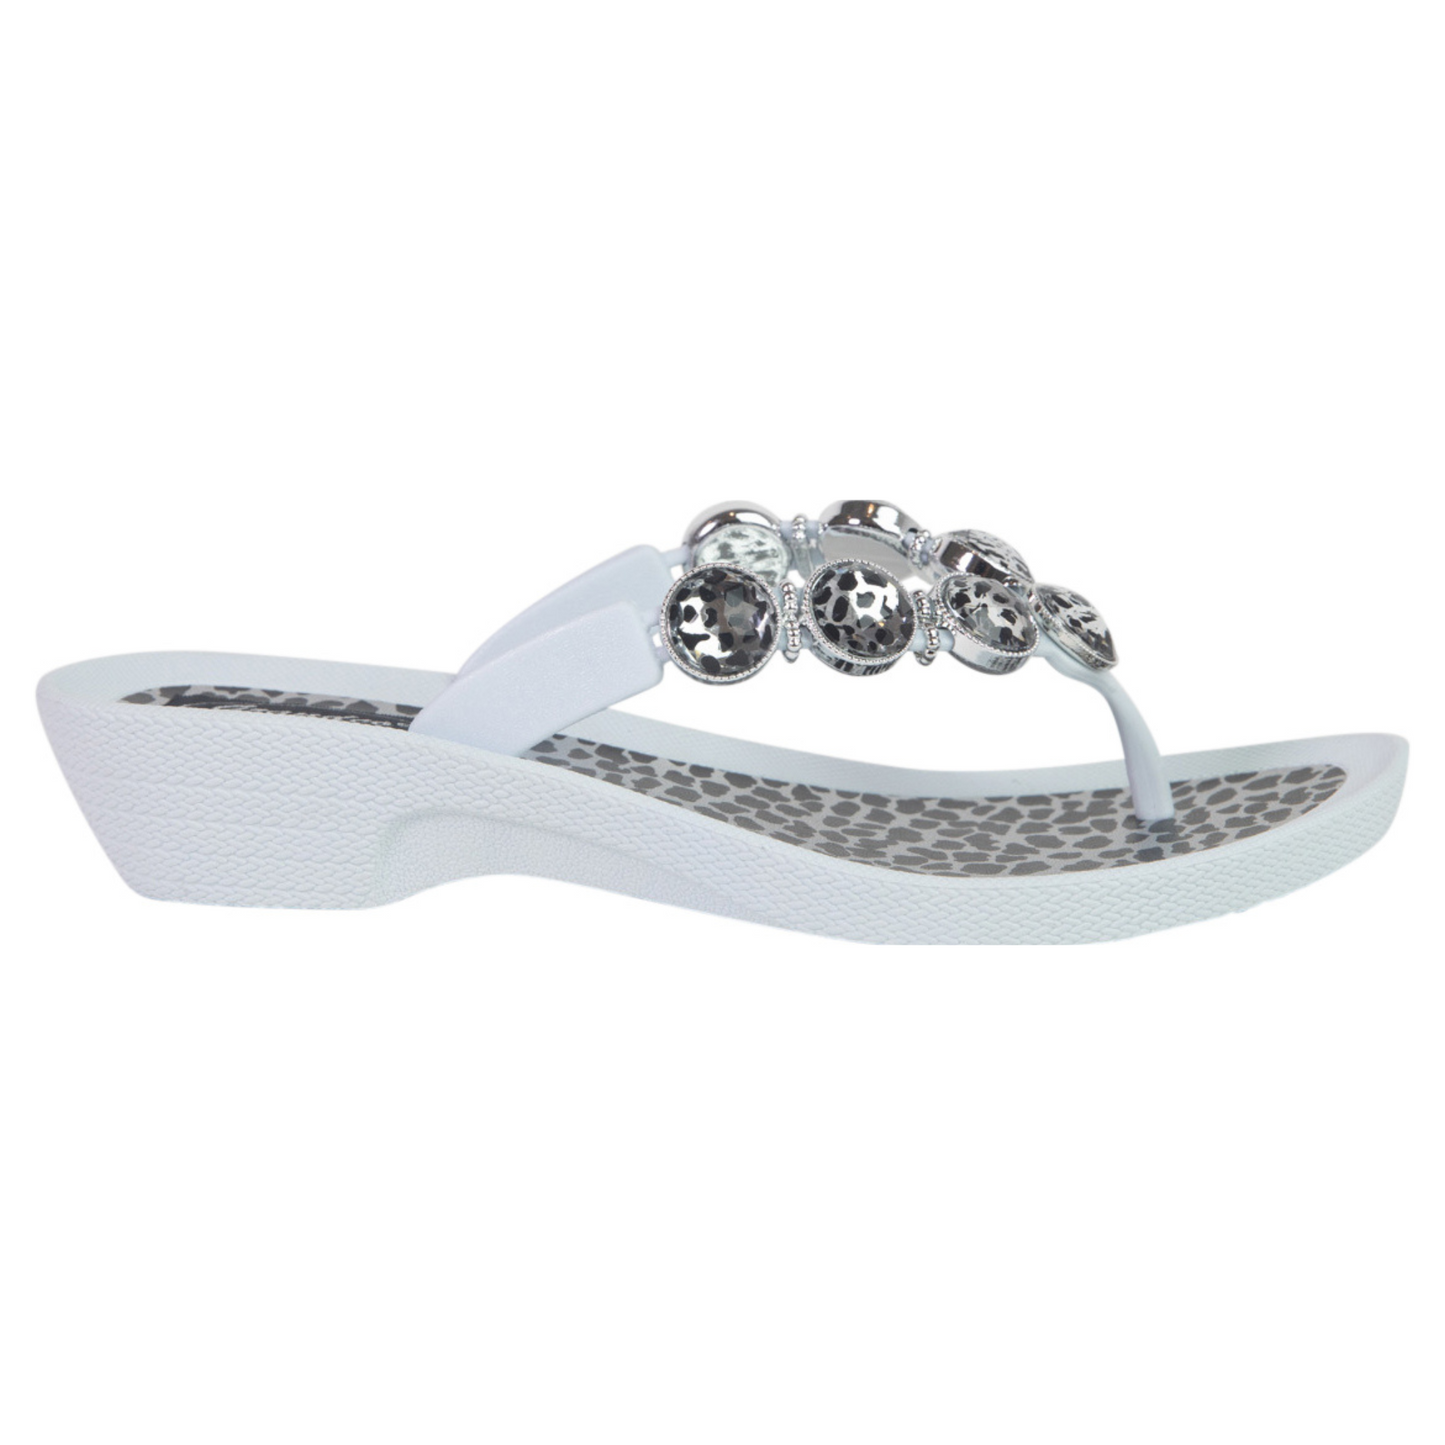 Grandco Leopard Crystal Bling Jandals - White